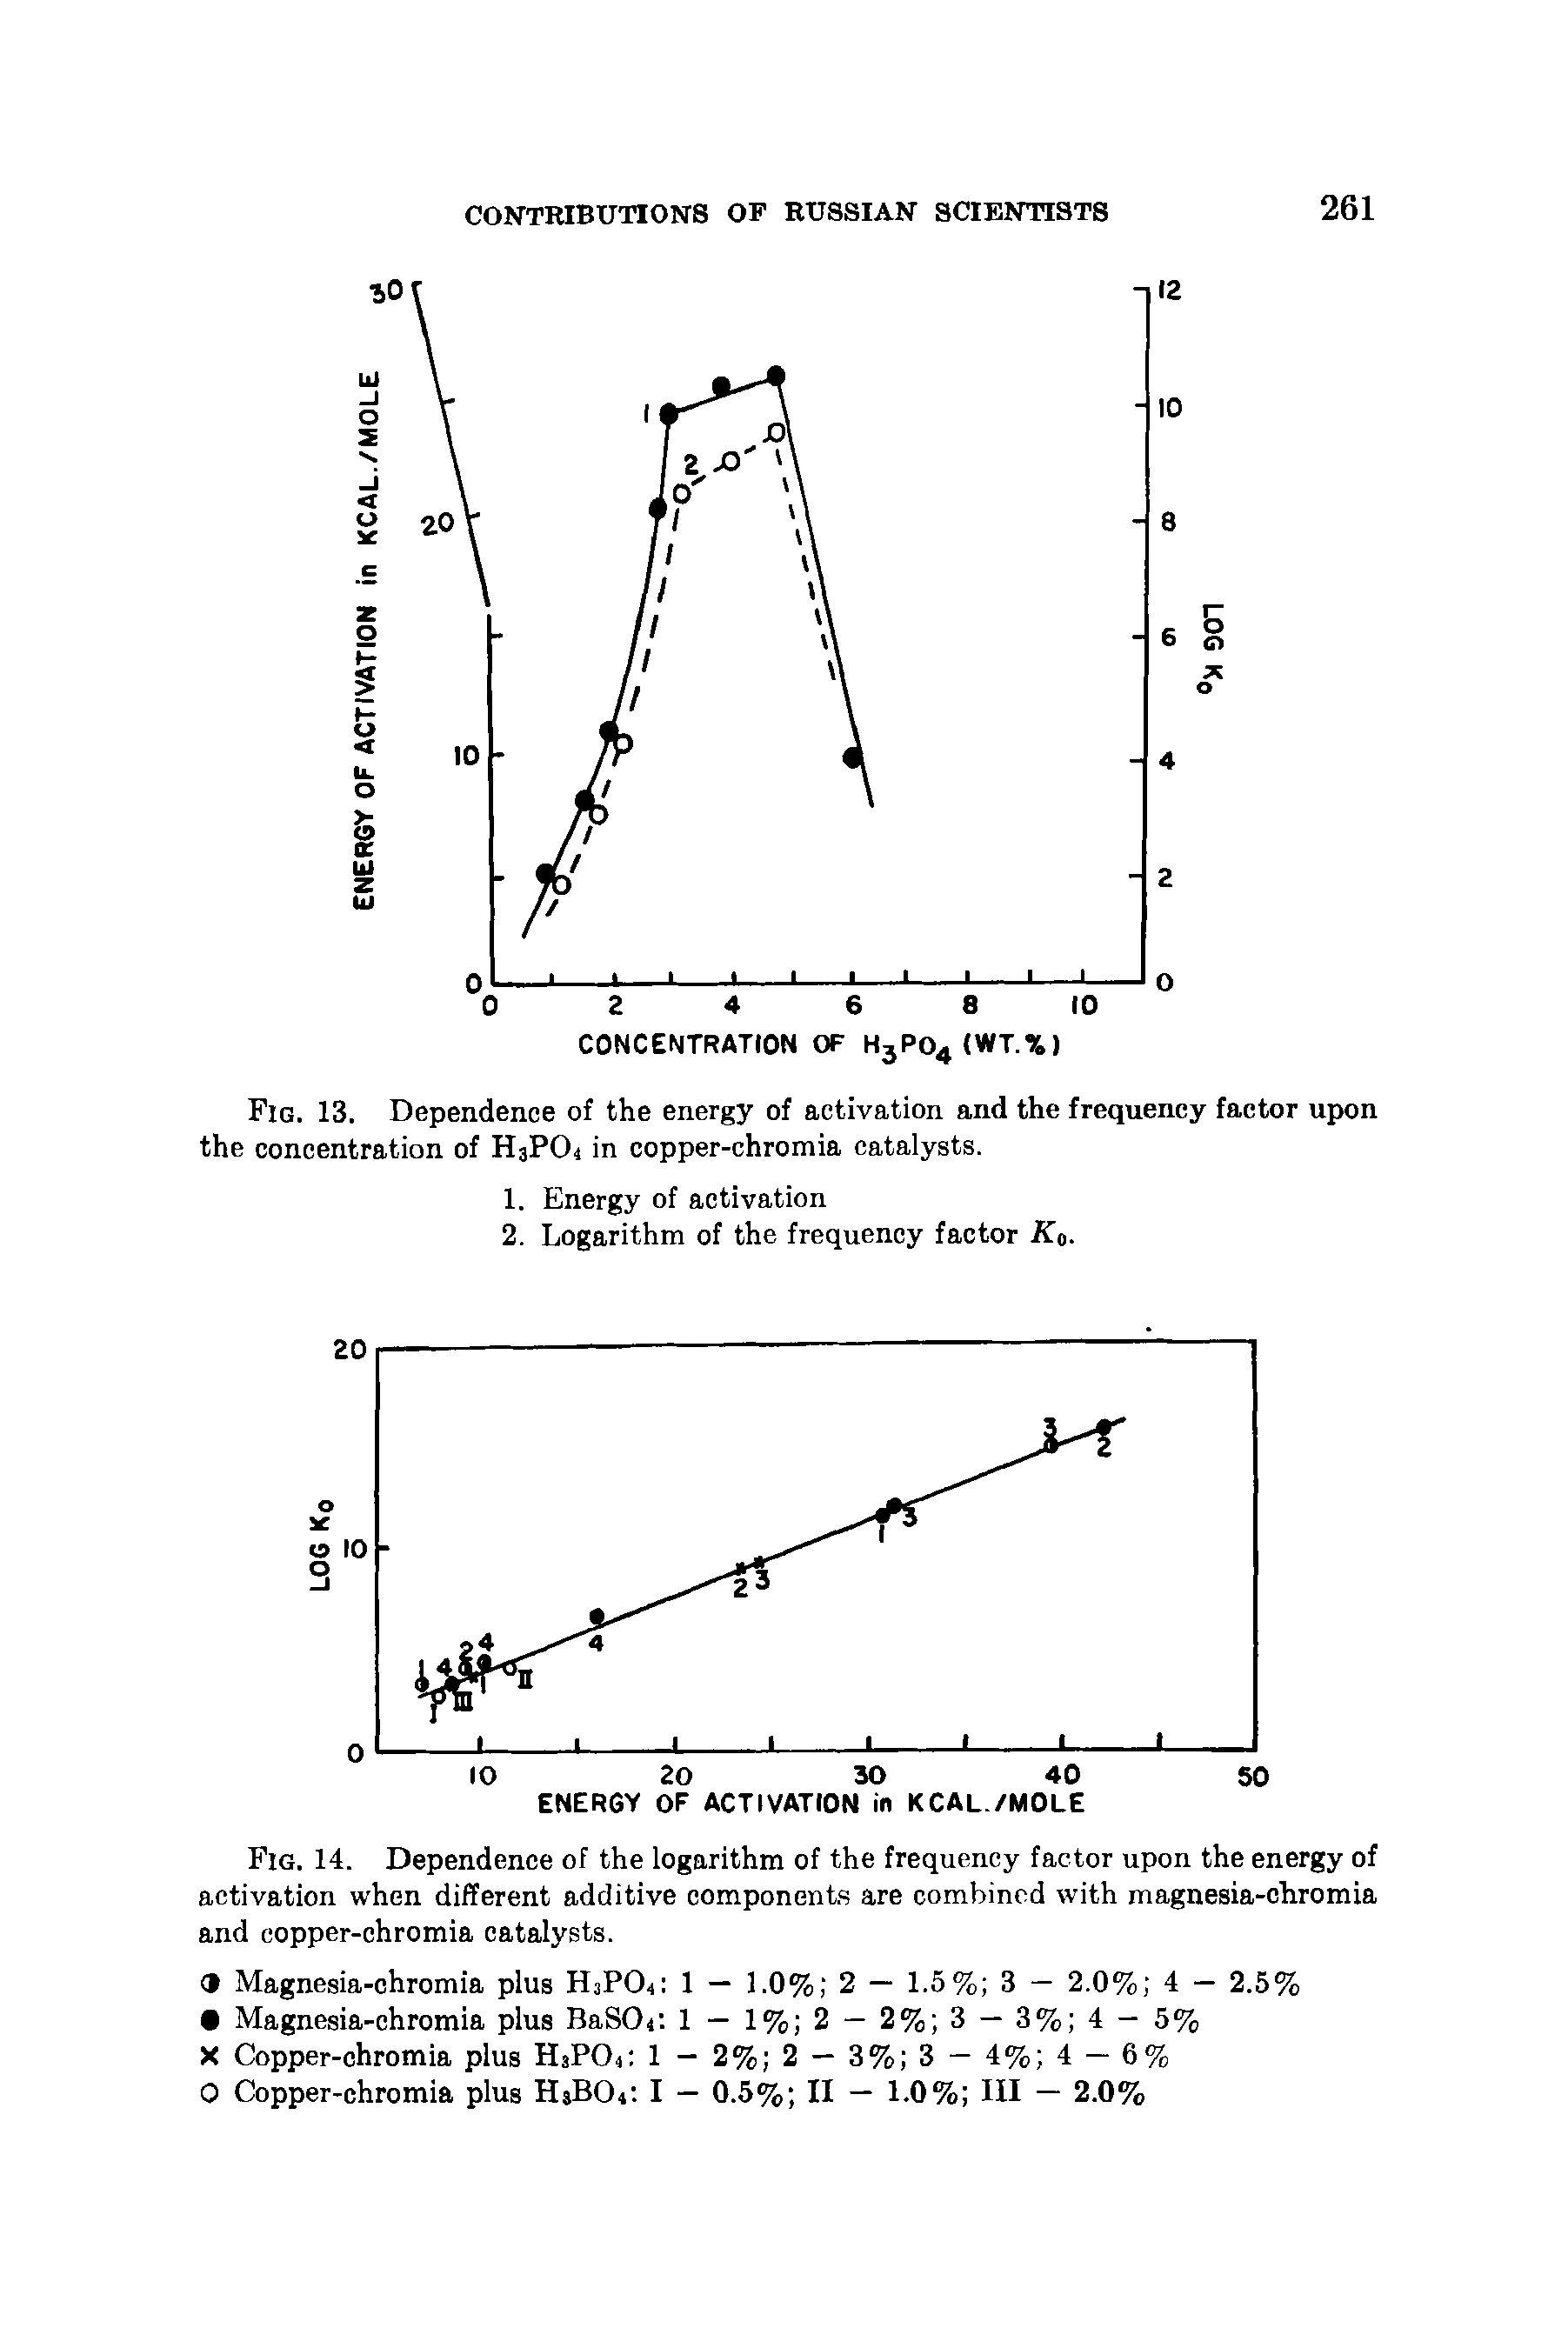 Fig. 14. Dependence of the logarithm of the frequency factor upon the energy of activation when different additive components are combined with magnesia-chromia and copper-chromia catalysts.